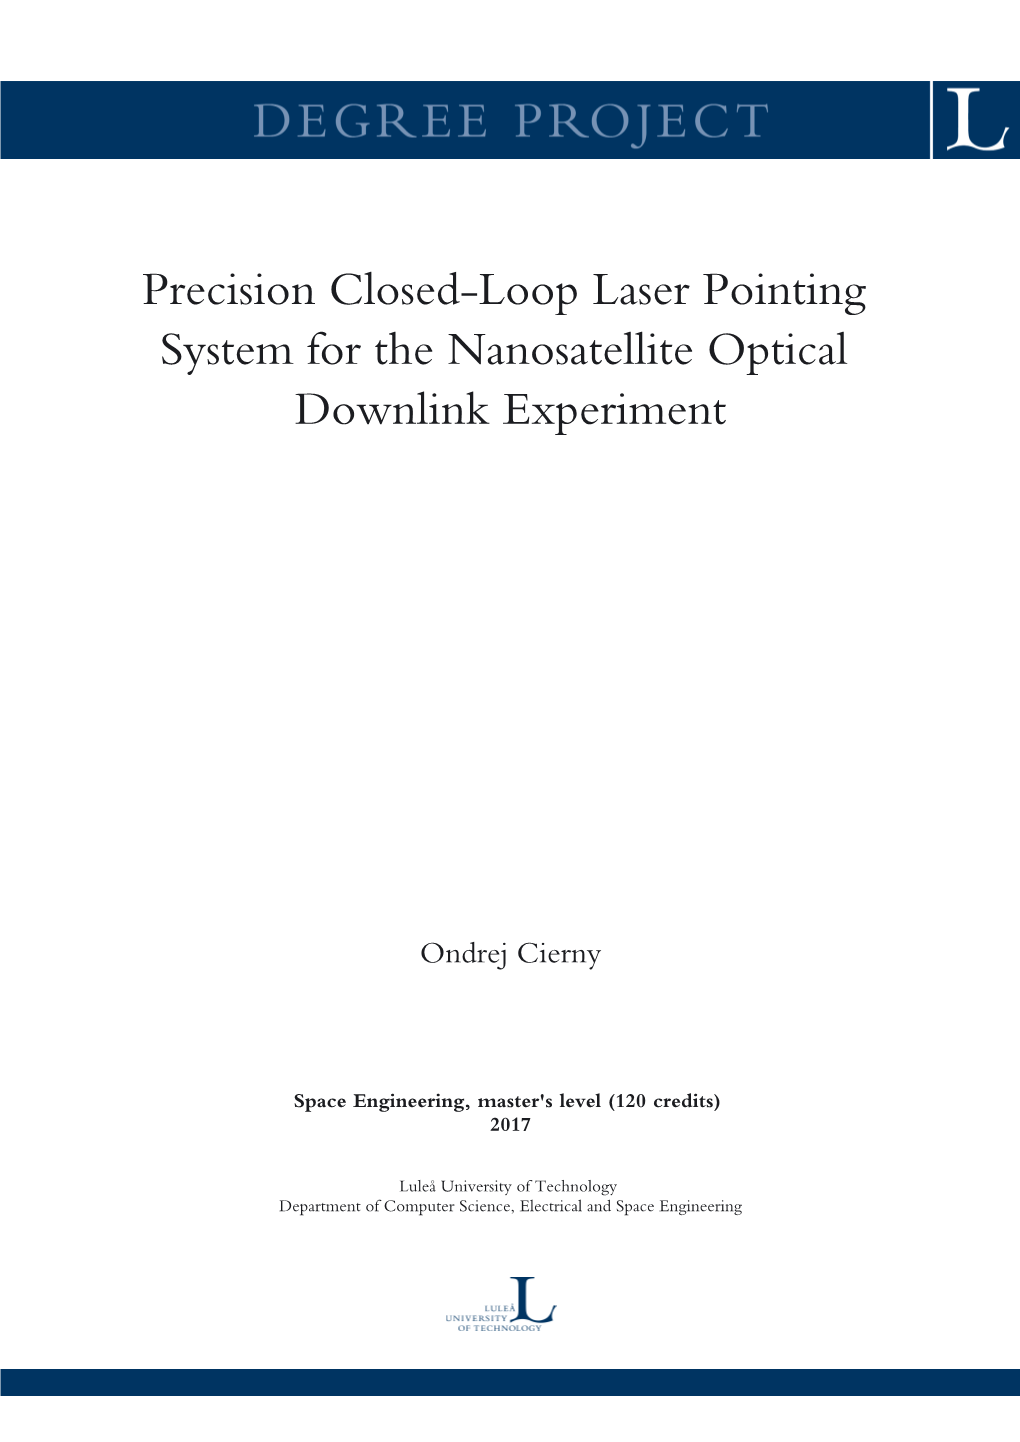 Precision Closed-Loop Laser Pointing System for the Nanosatellite Optical Downlink Experiment